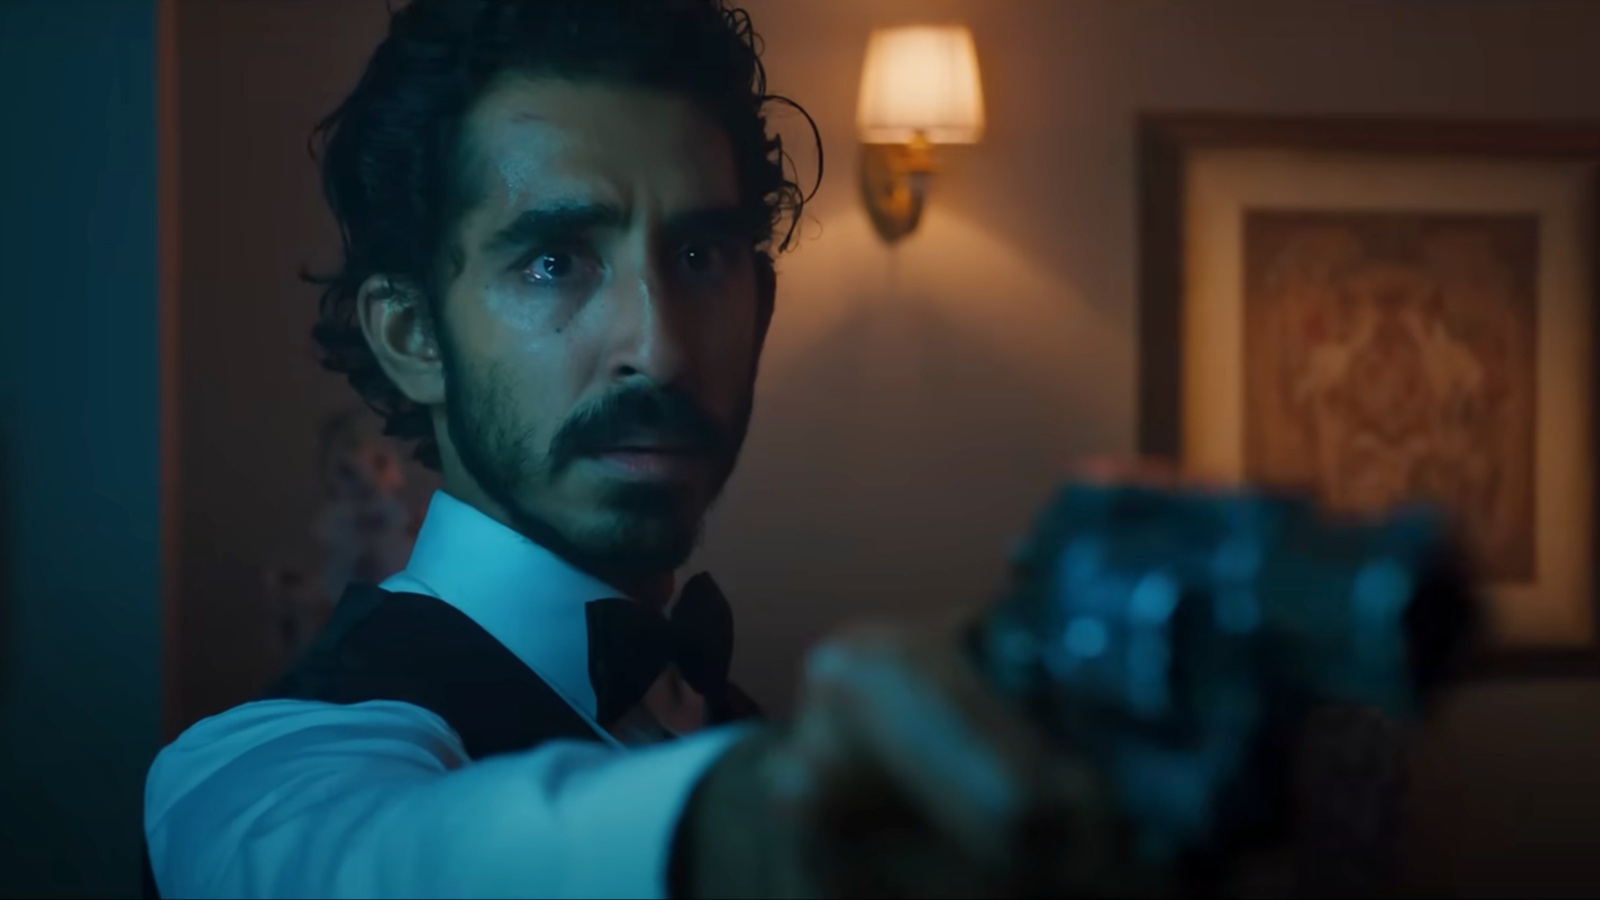 android, dev patel cut crucial monkey man scene for ‘political’ reasons, apologised to makarand deshpande at the premiere